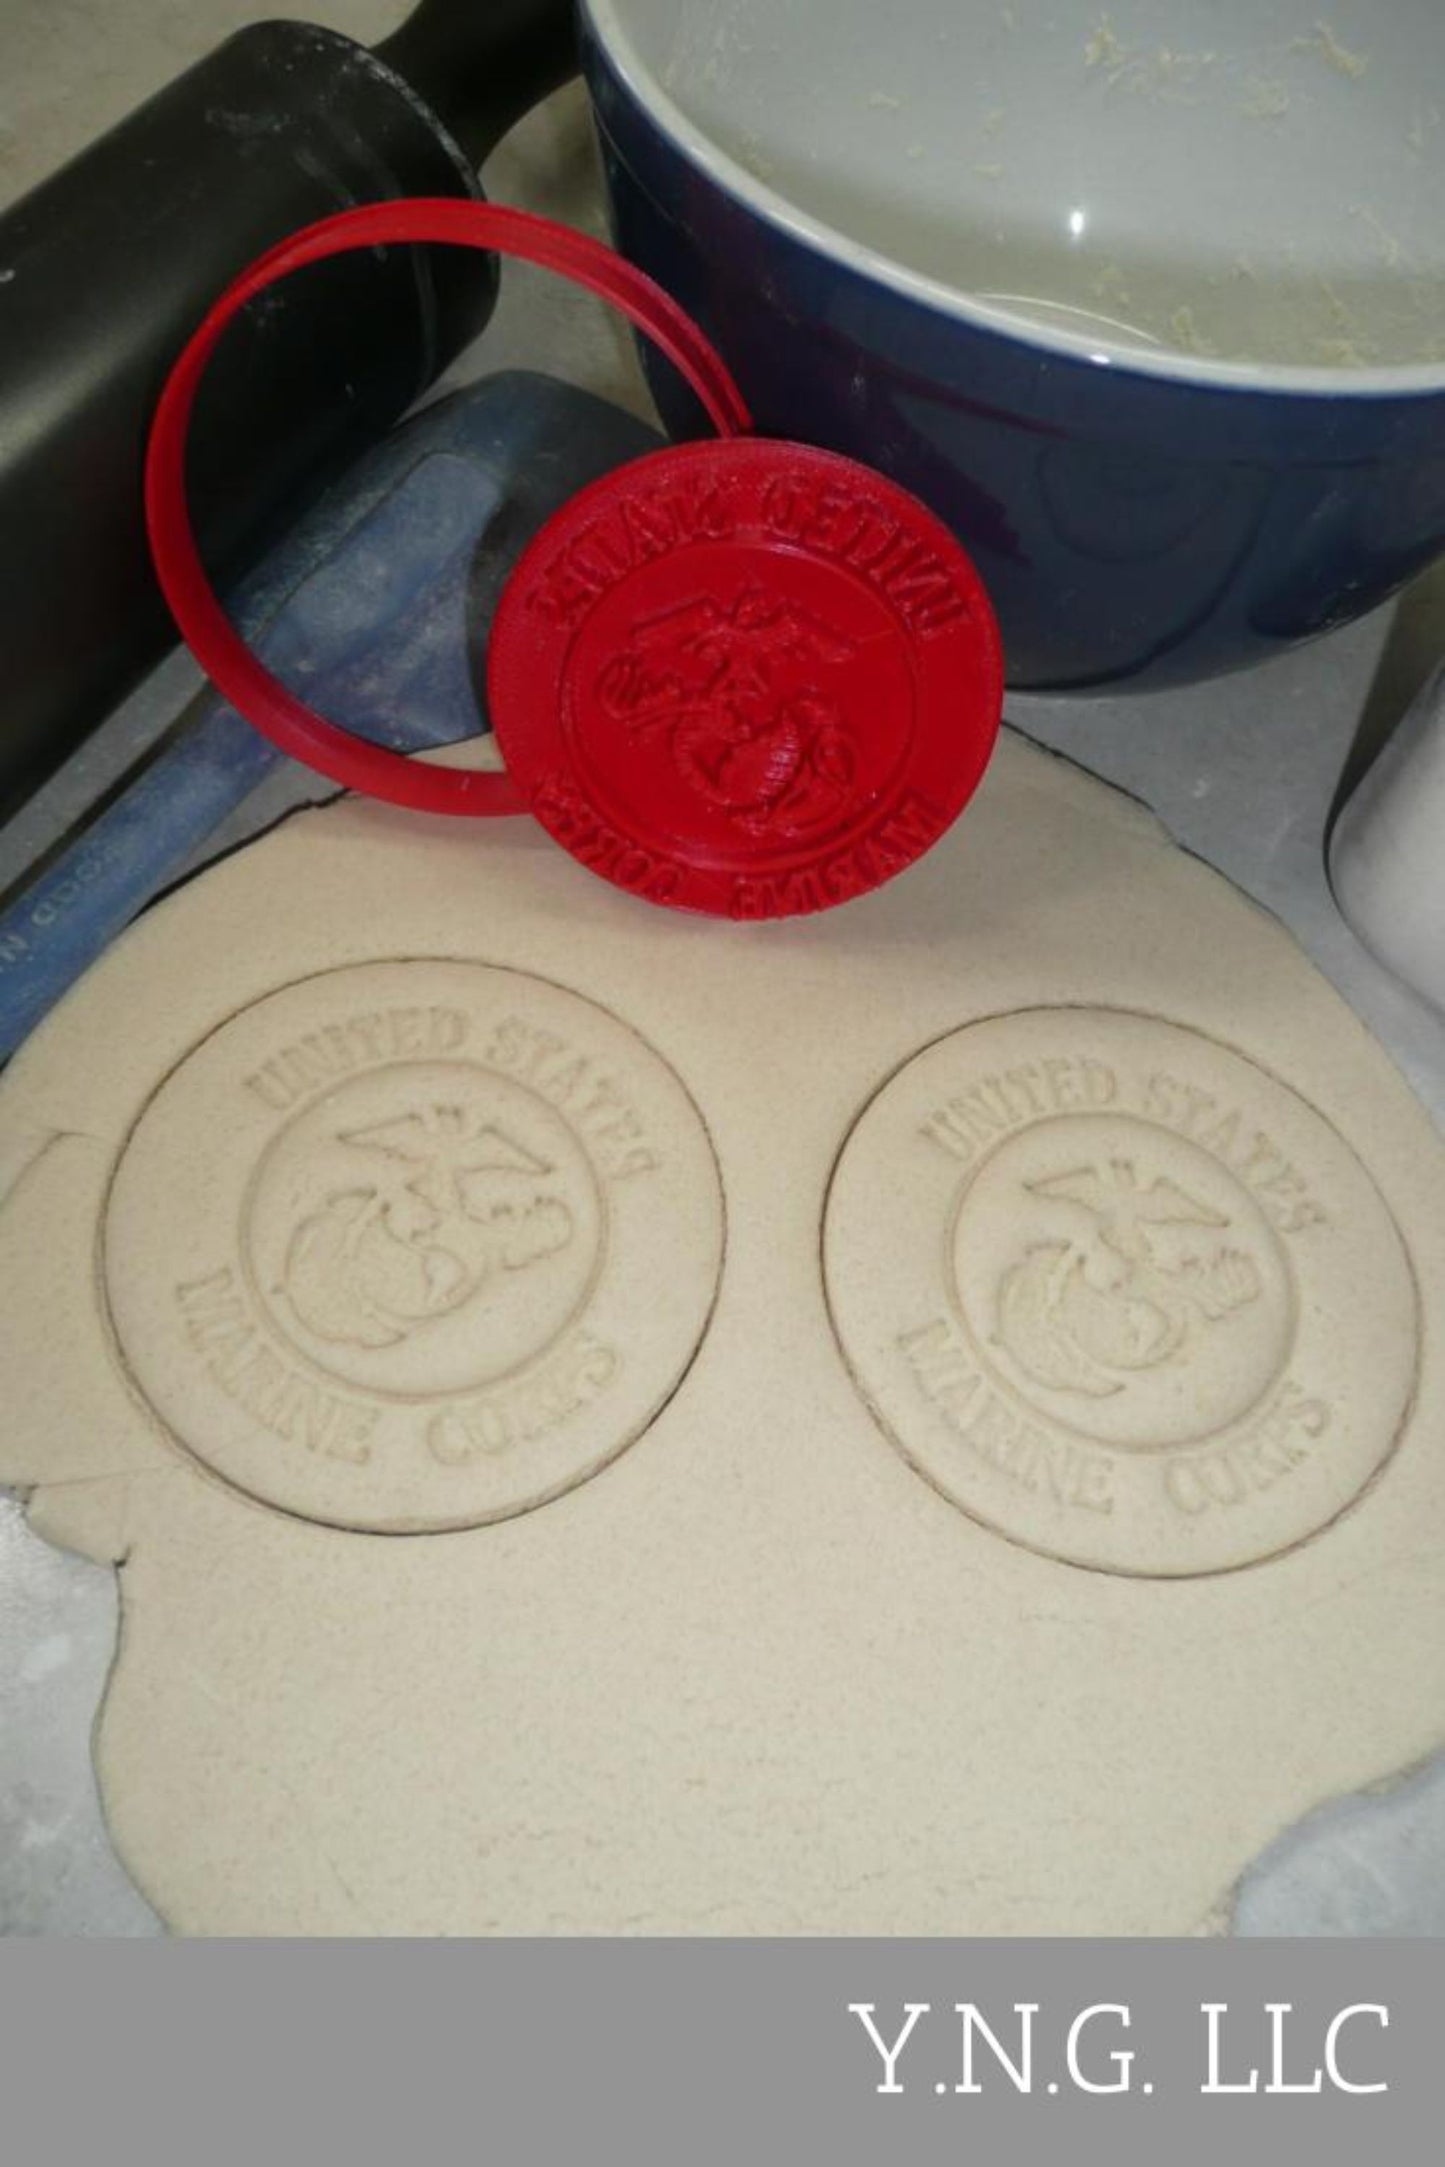 2 Piece United States Marine Corps Cookie Cutter and Stamp USA PR4136